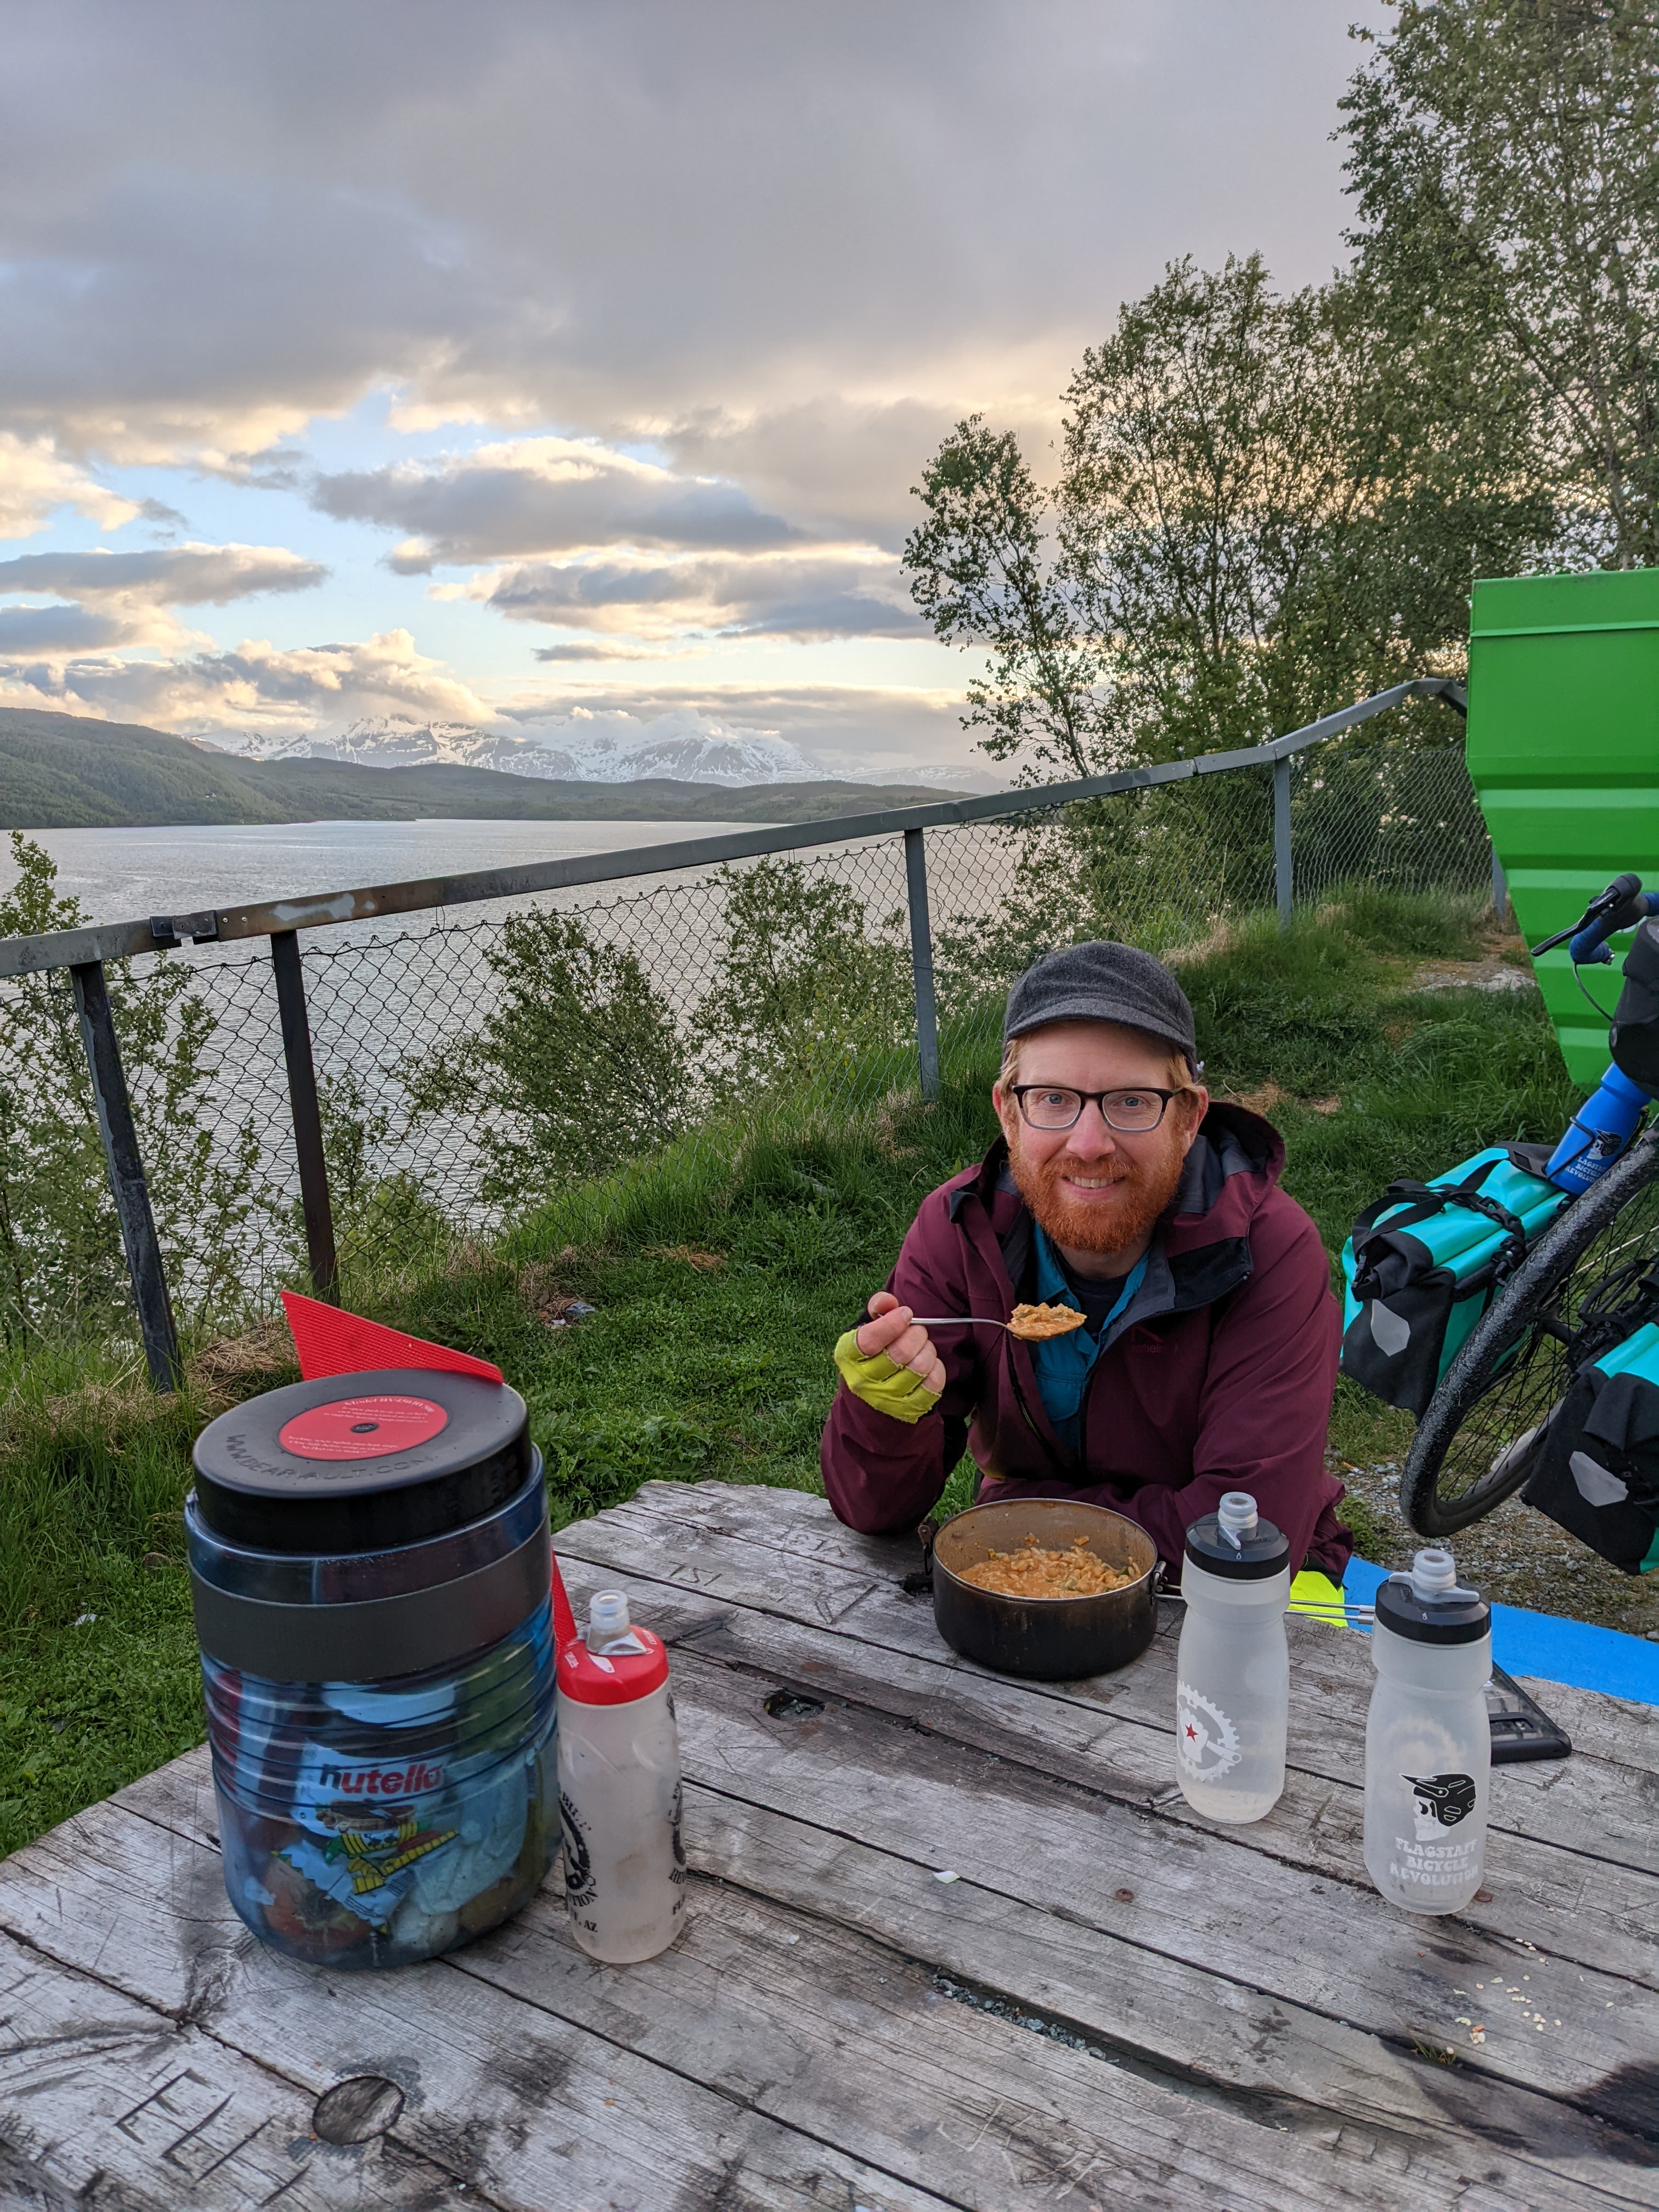 Chris eating dinner at a picnic table overlooking the fjord